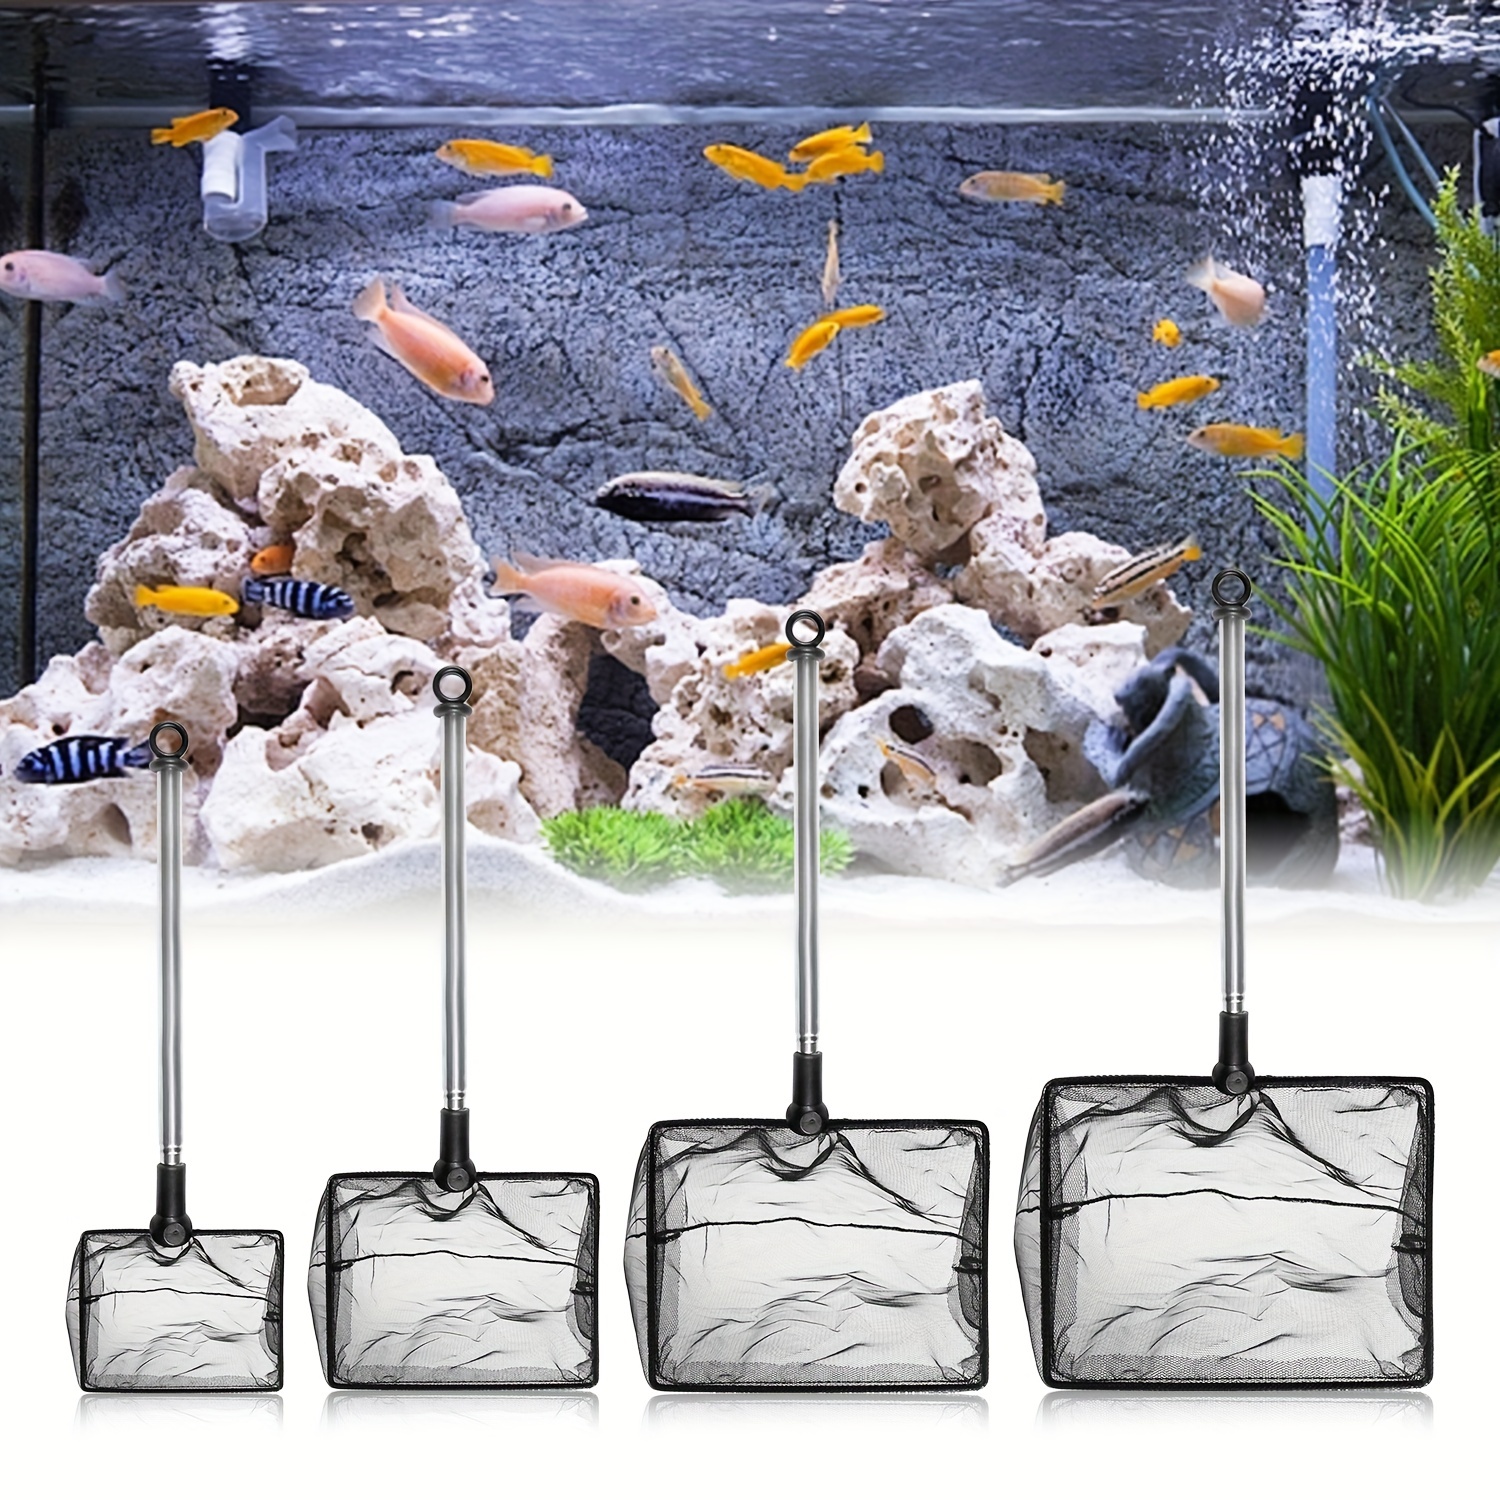 Fishing Net Durable Stainless Steel Aquarium Fish Net with